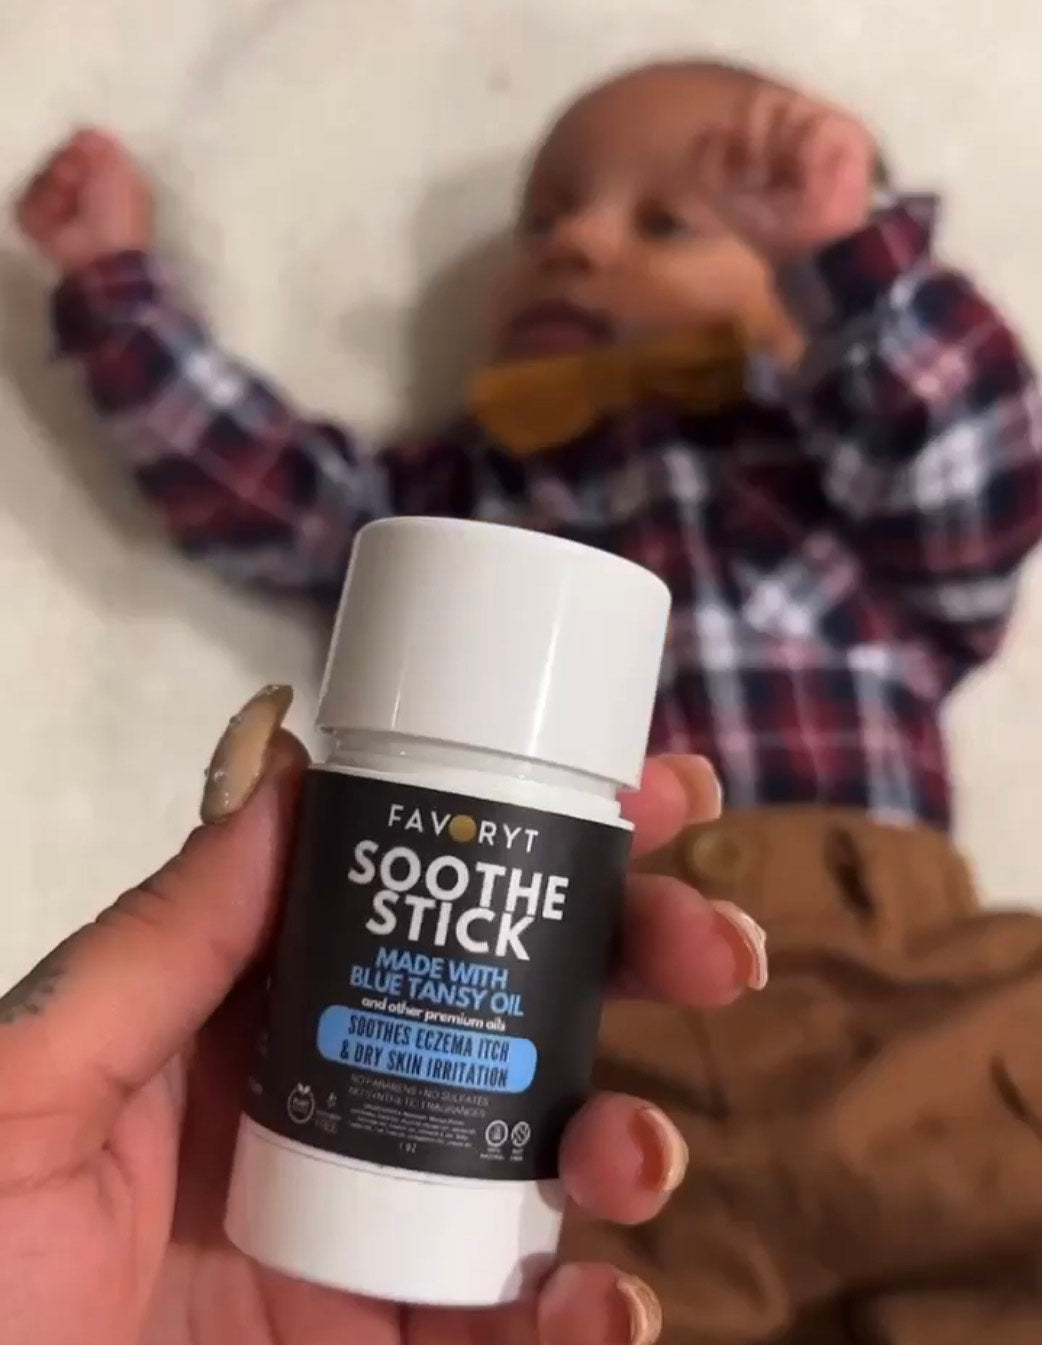 What Makes the Soothe Stick so Special?